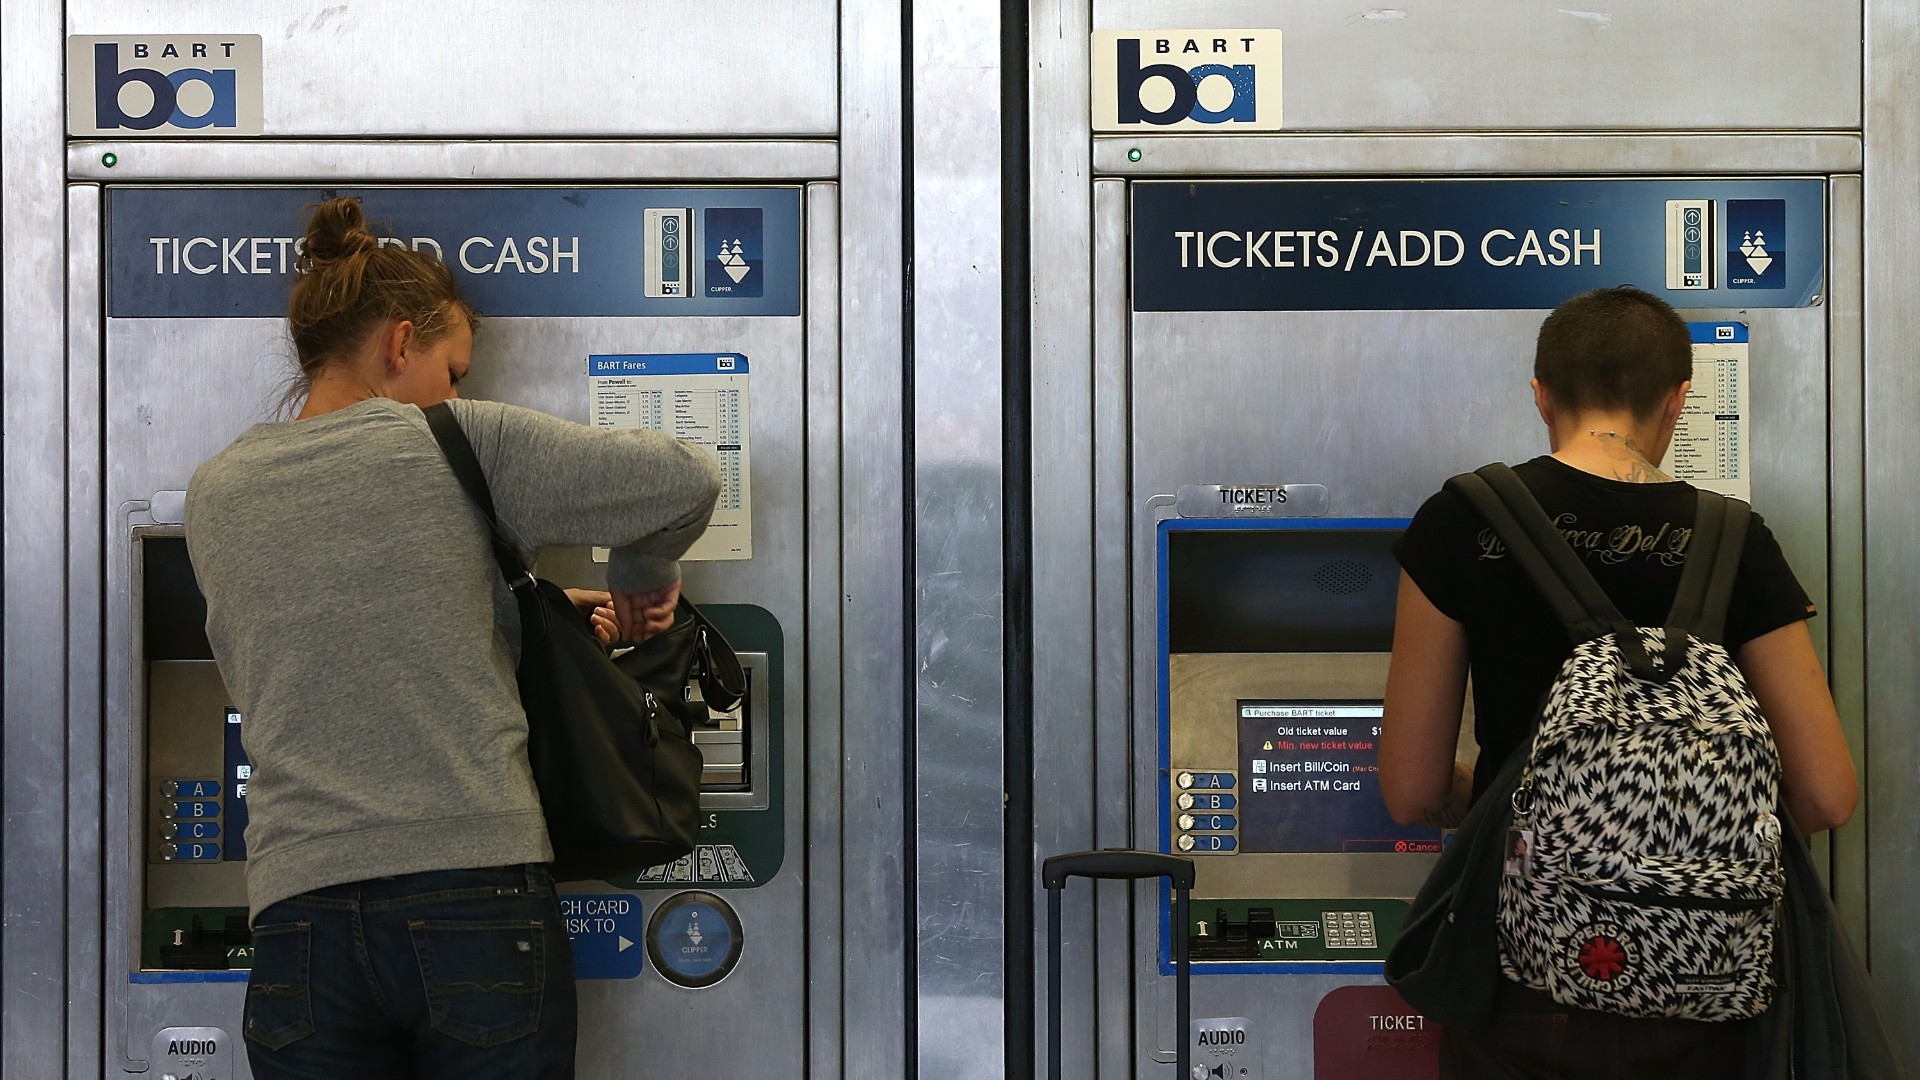 bart clipper card flat prices